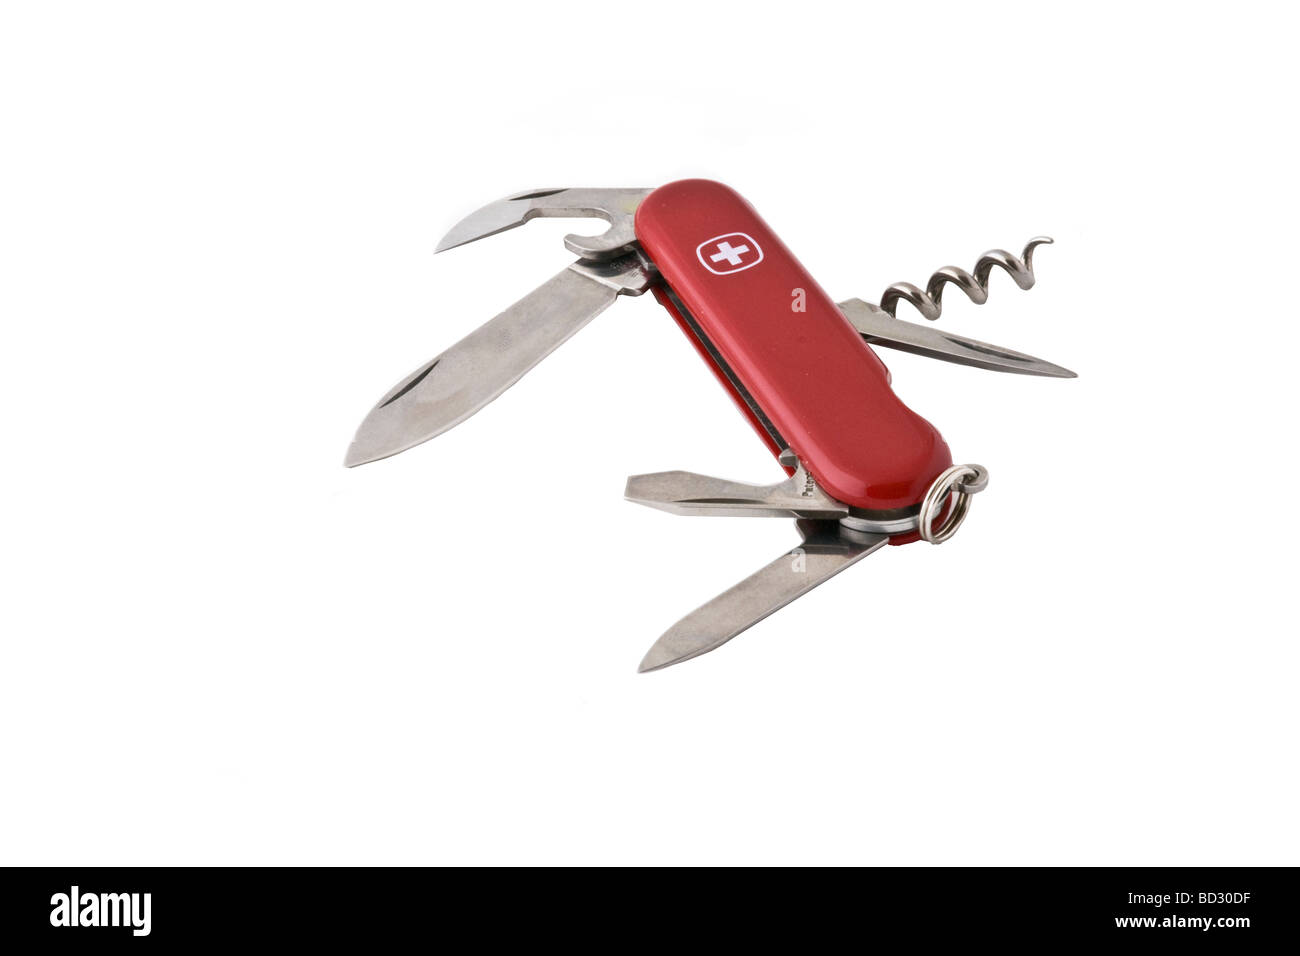 Swiss Army Knife made by Wenger. Model - Classic 7 Stock Photo